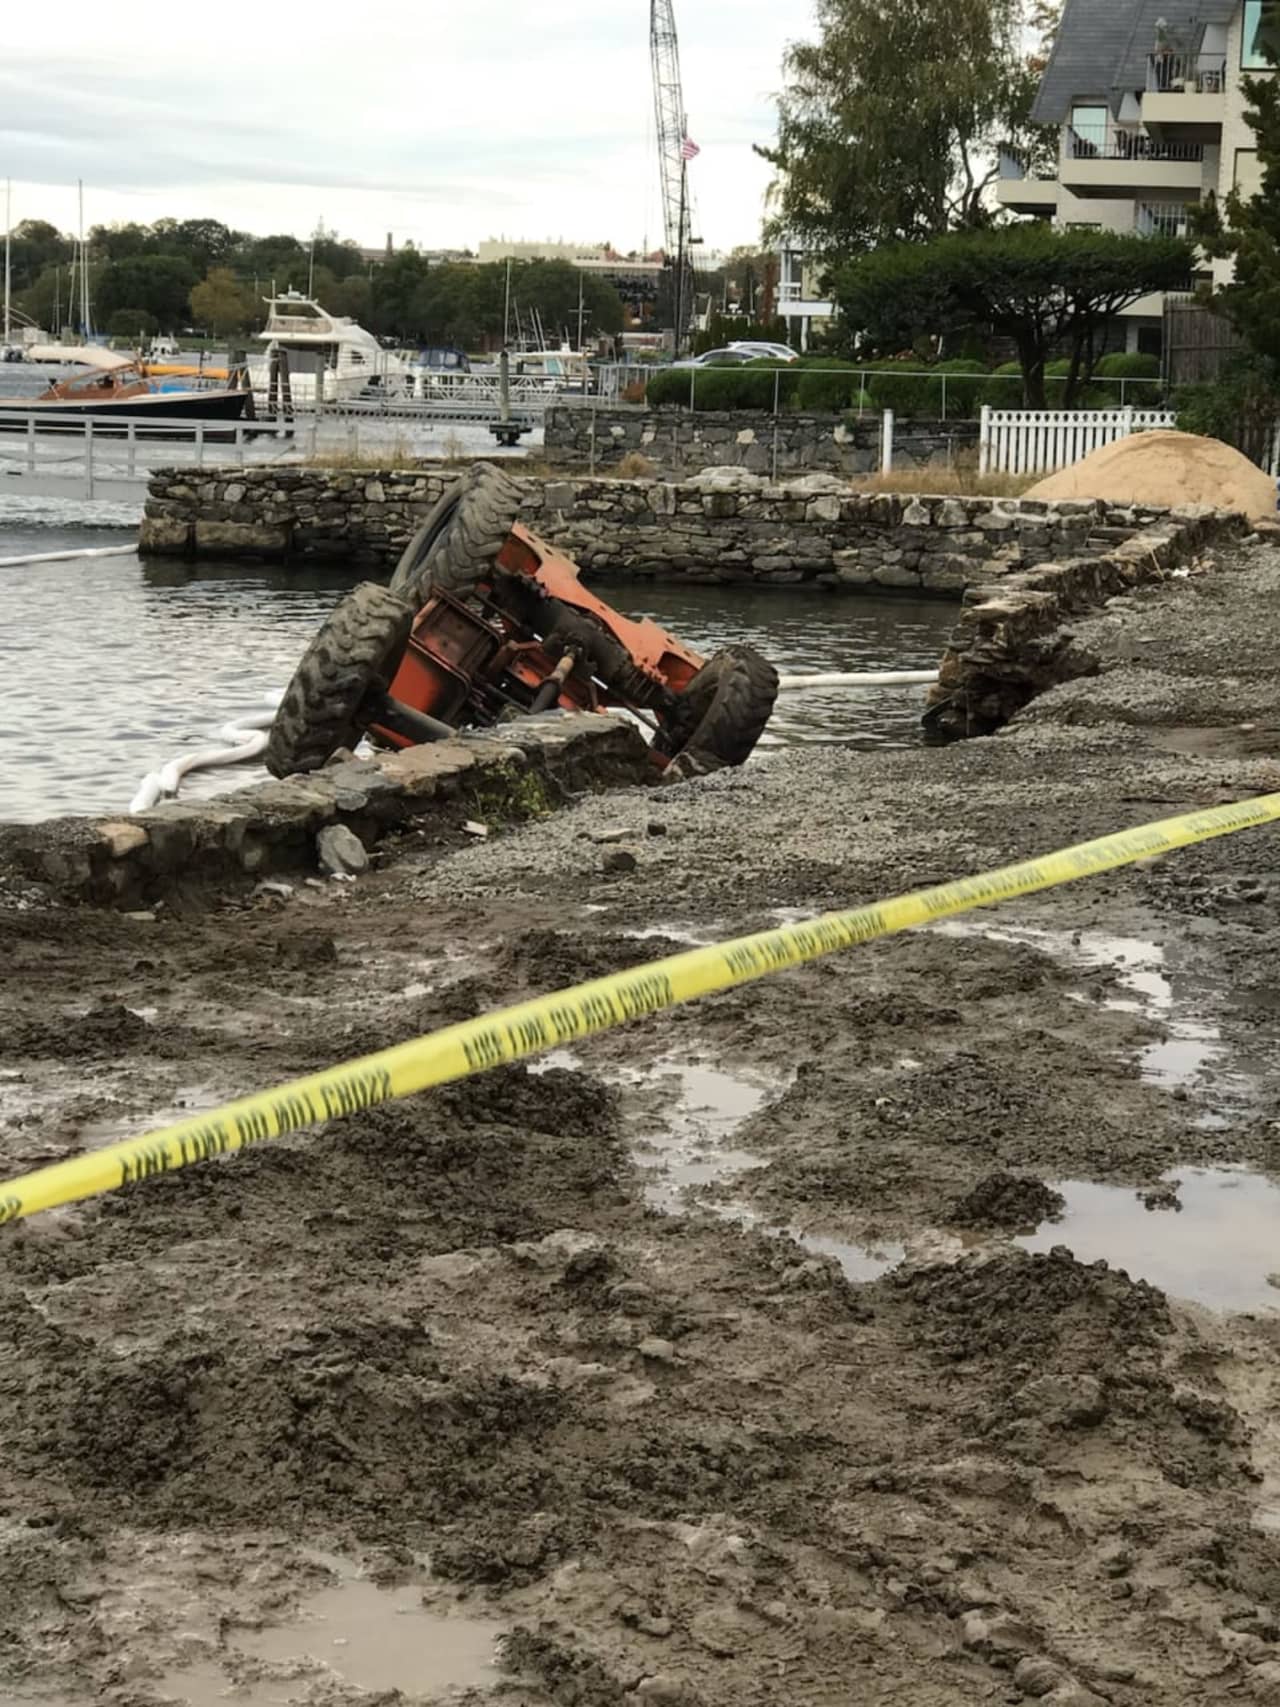 A forklift operator was a little wet, but unharmed after a seawall collapse sent the machine into the water.